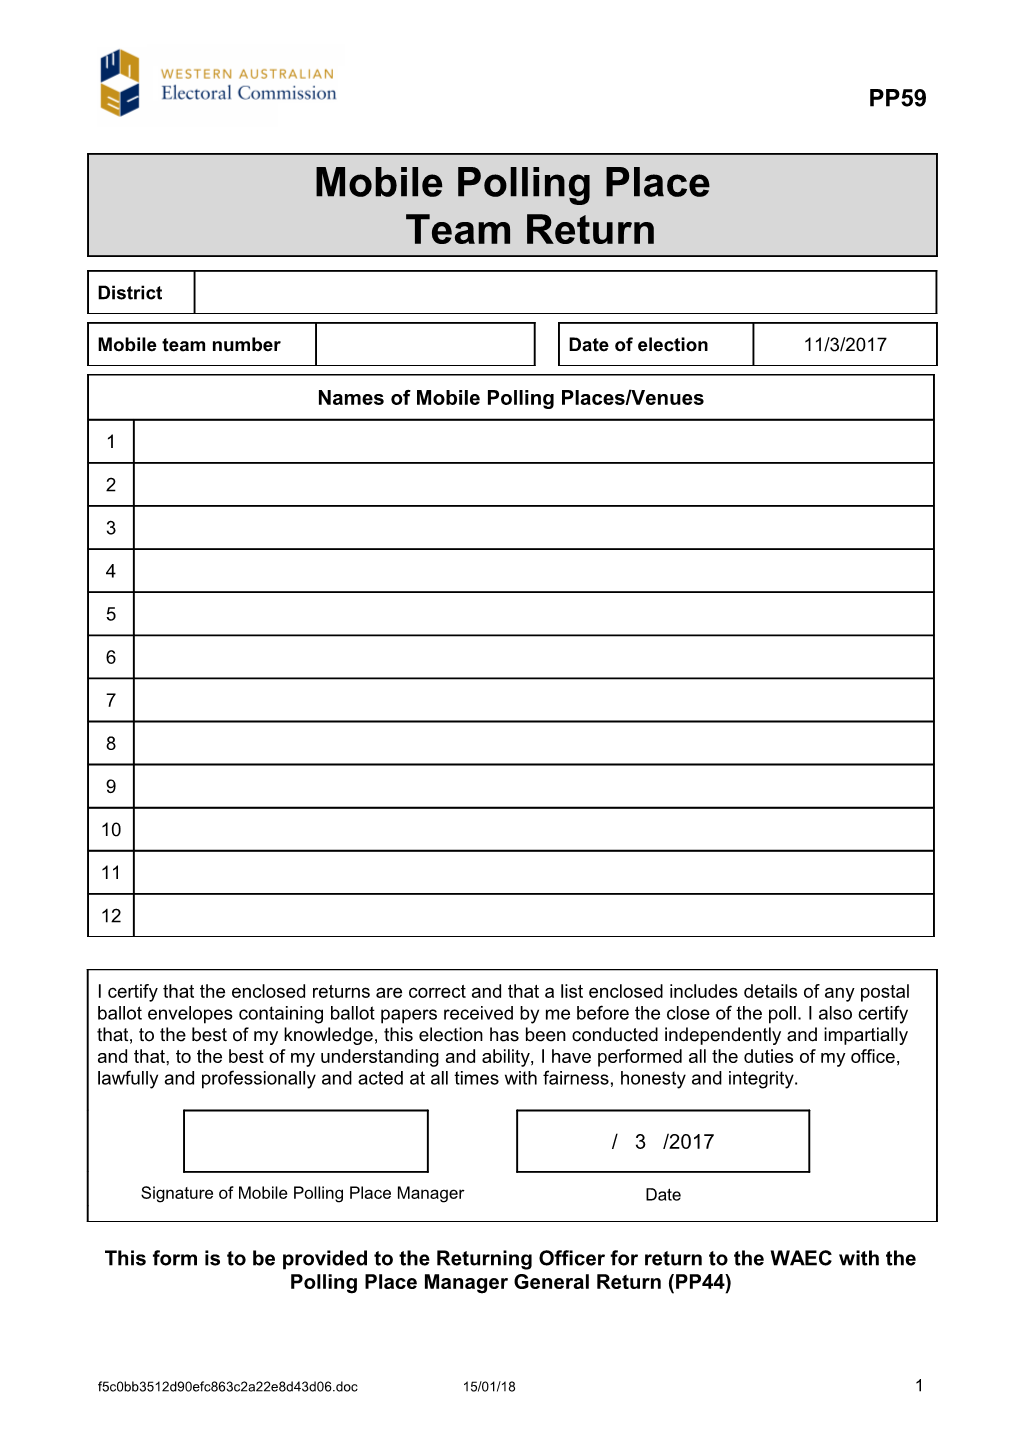 PP59 - Mobile Polling Place Team Return